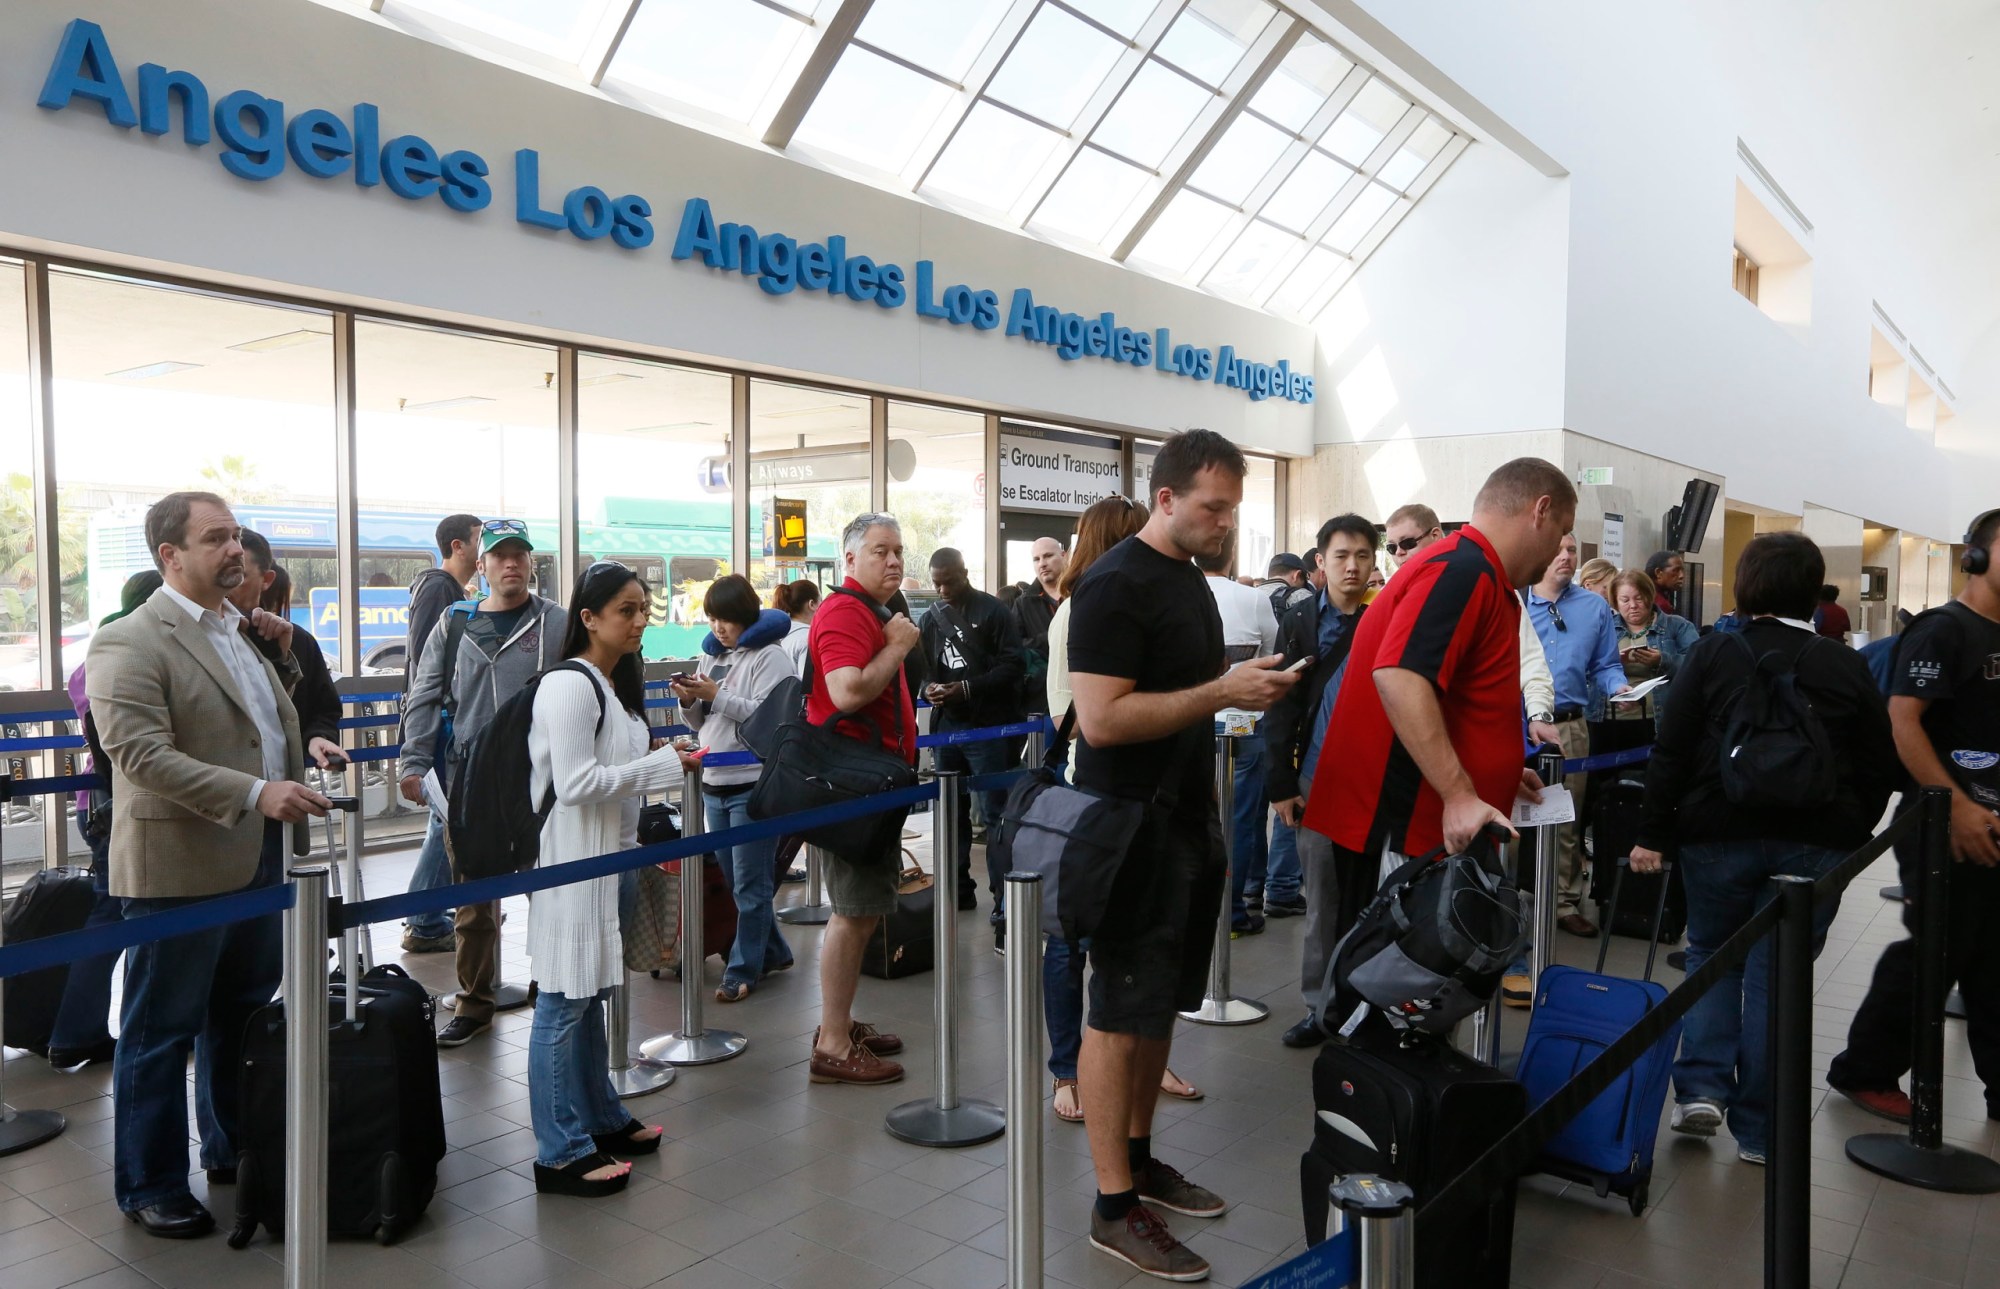 Travelers stand on line at the LAX International Airport in Los Angeles. It was a tough start to the week for many air travelers, as thousands of air traffic controllers were forced to take an unpaid day off because of federal budget cuts. (AP/Damian Dovarganes)